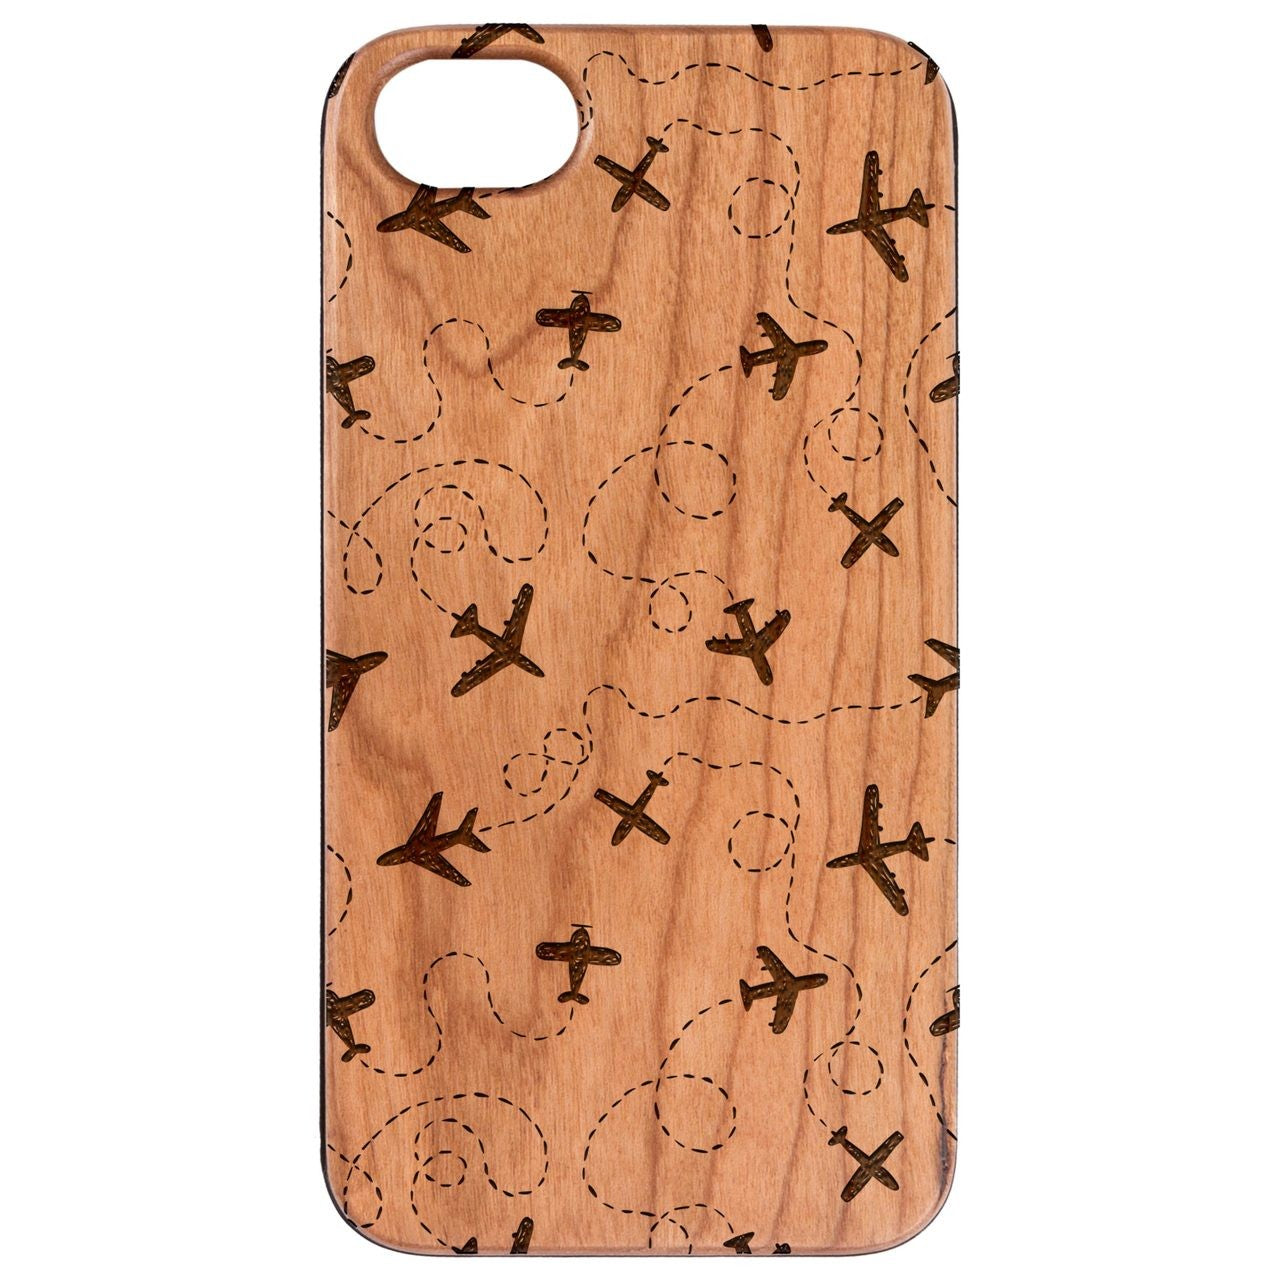  Plane Pattern - Engraved - Wooden Phone Case - IPhone 13 Models